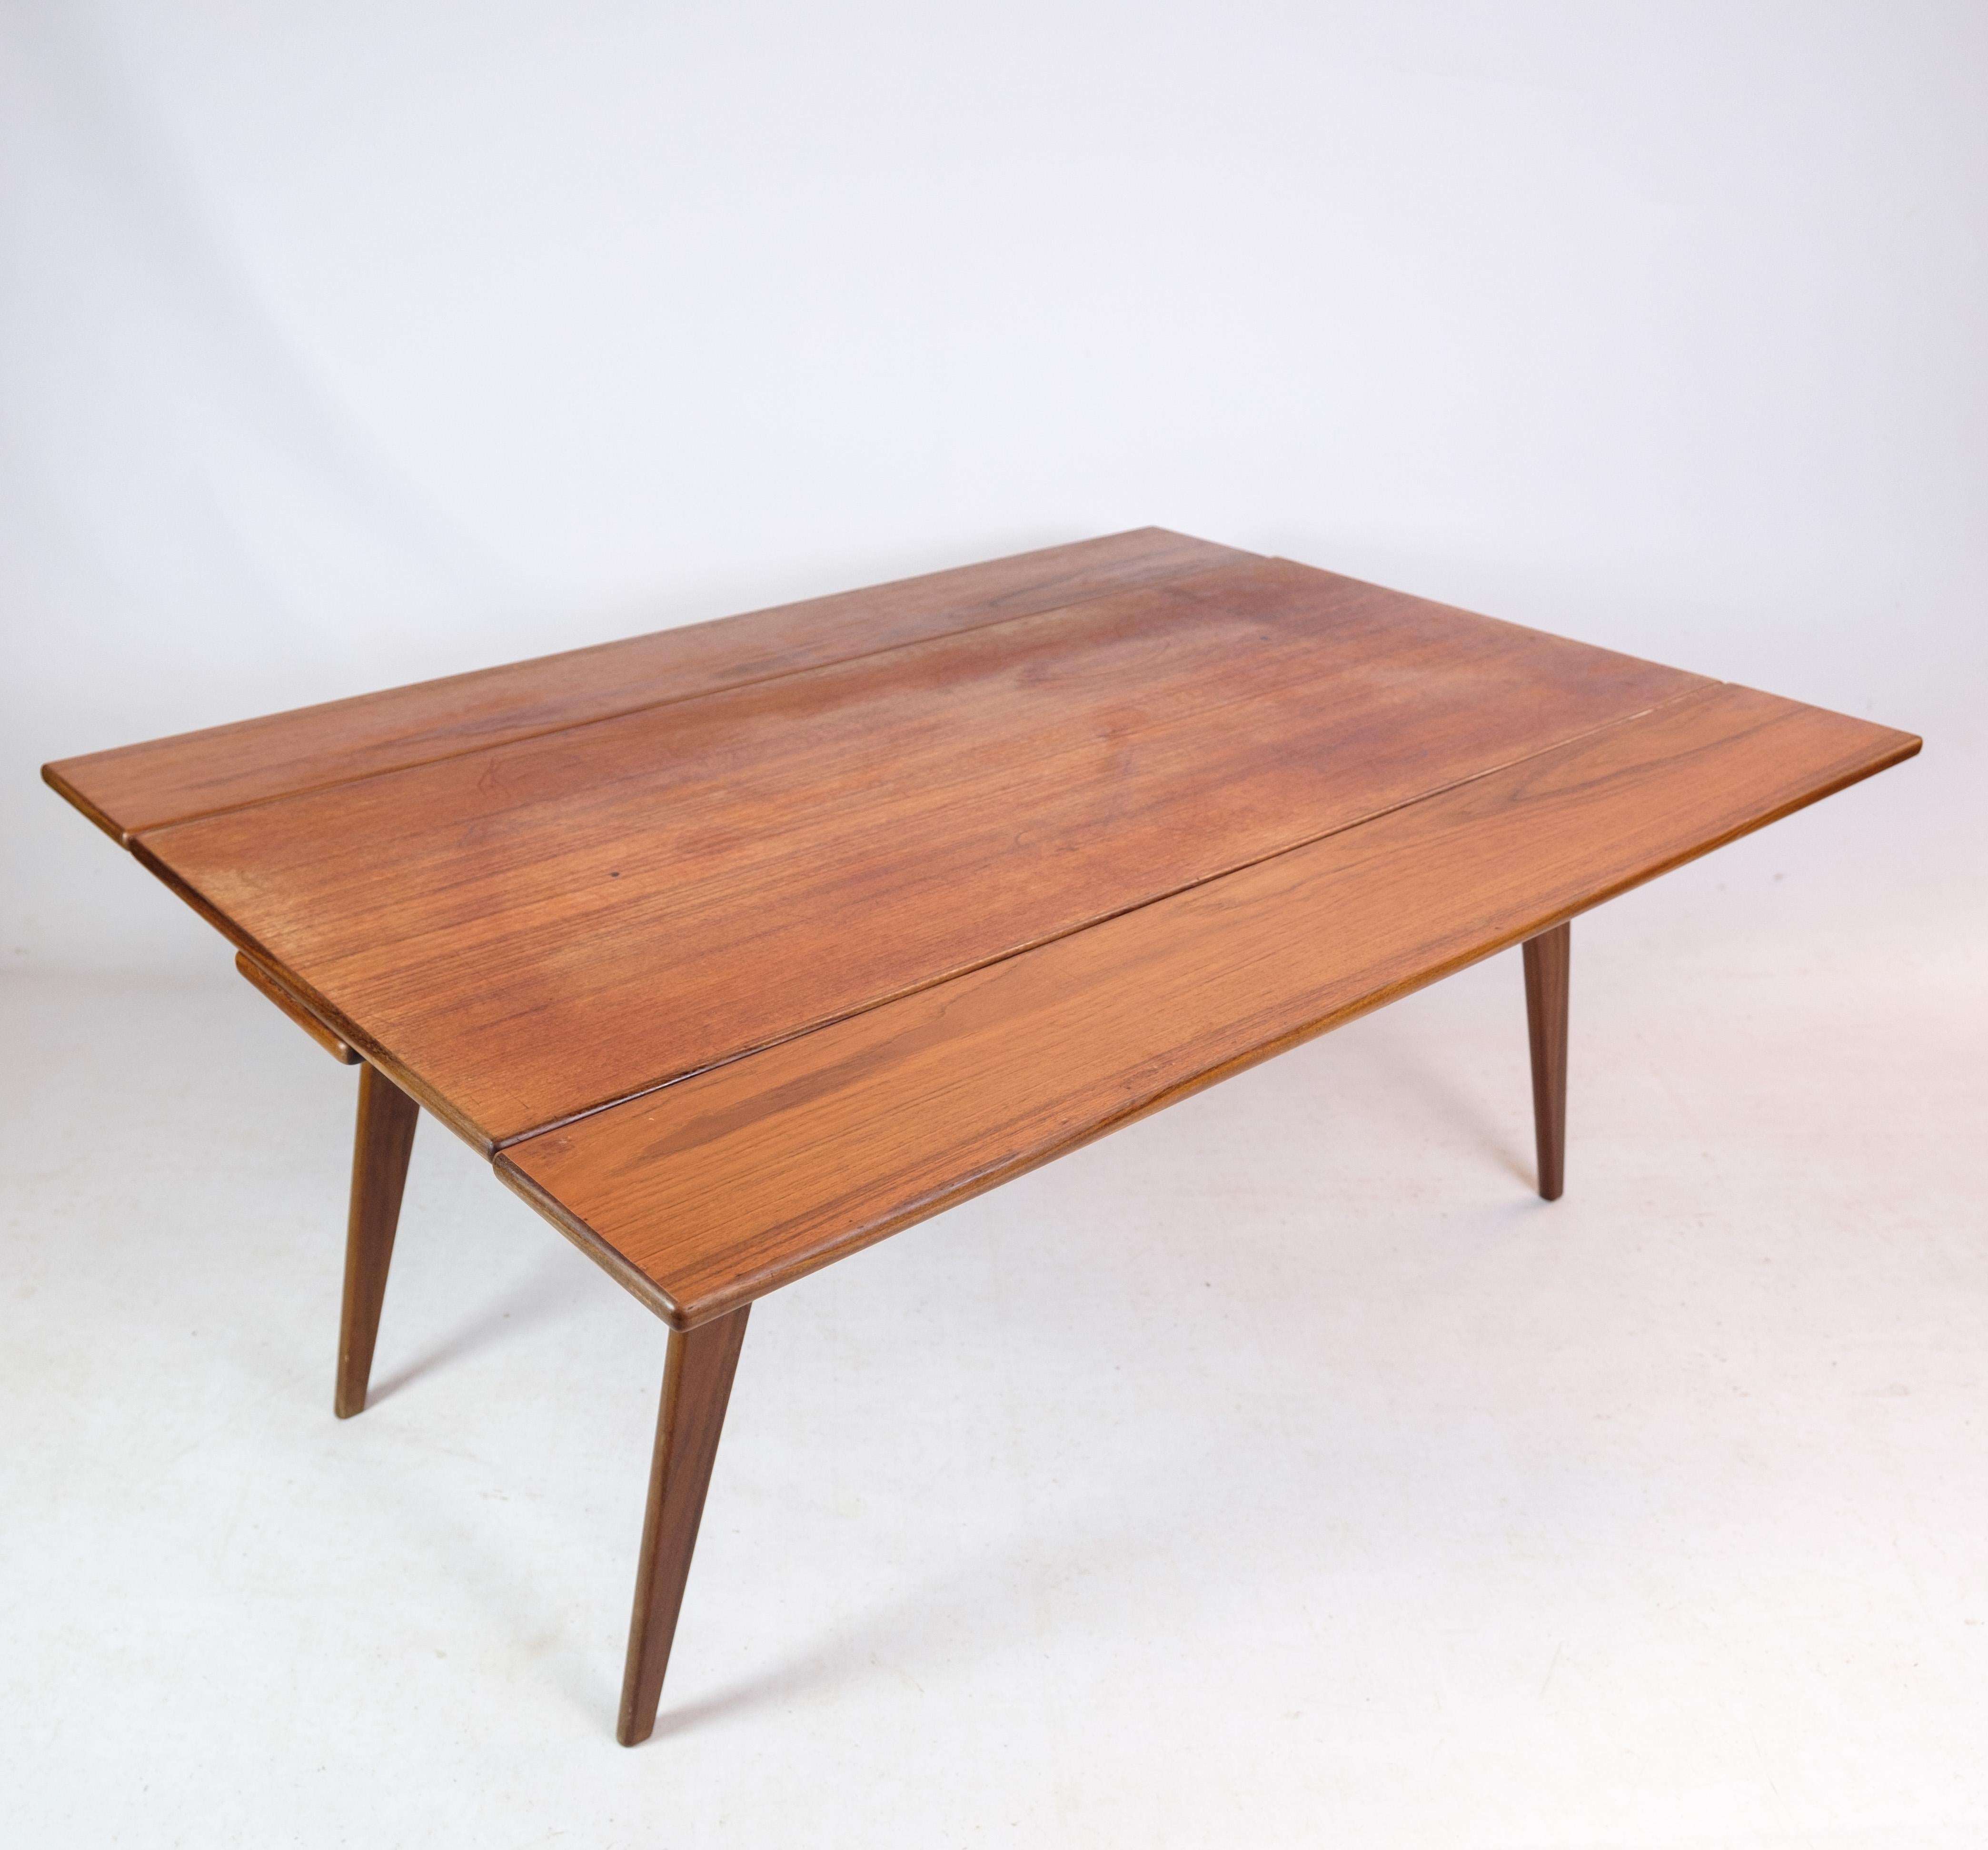 Coffee table / dining table in teak wood, often called a Copenhagen table, made by a Danish furniture manufacturer from around the 1960s.

This product will be inspected thoroughly at our professional workshop by our educated employees, who assure